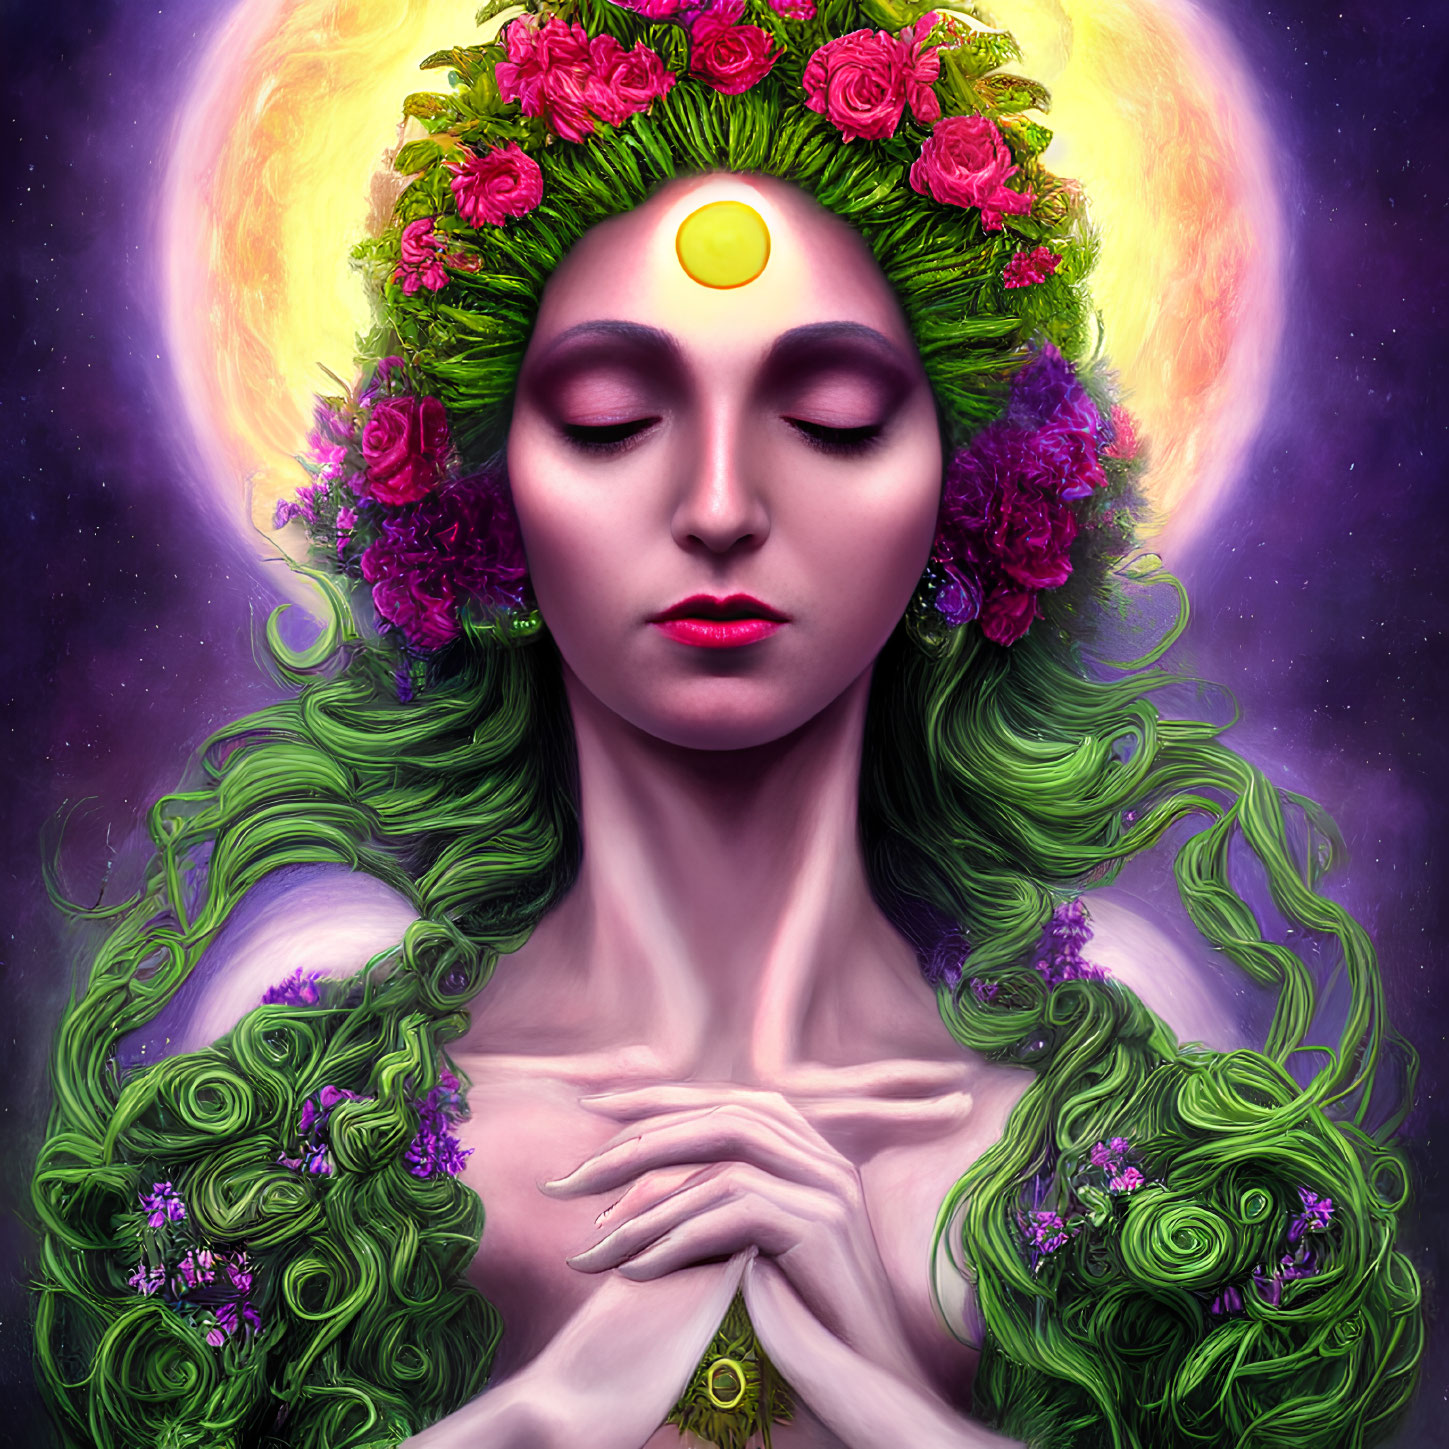 Woman with Green Hair and Flower Crown in Meditative Pose on Celestial Background